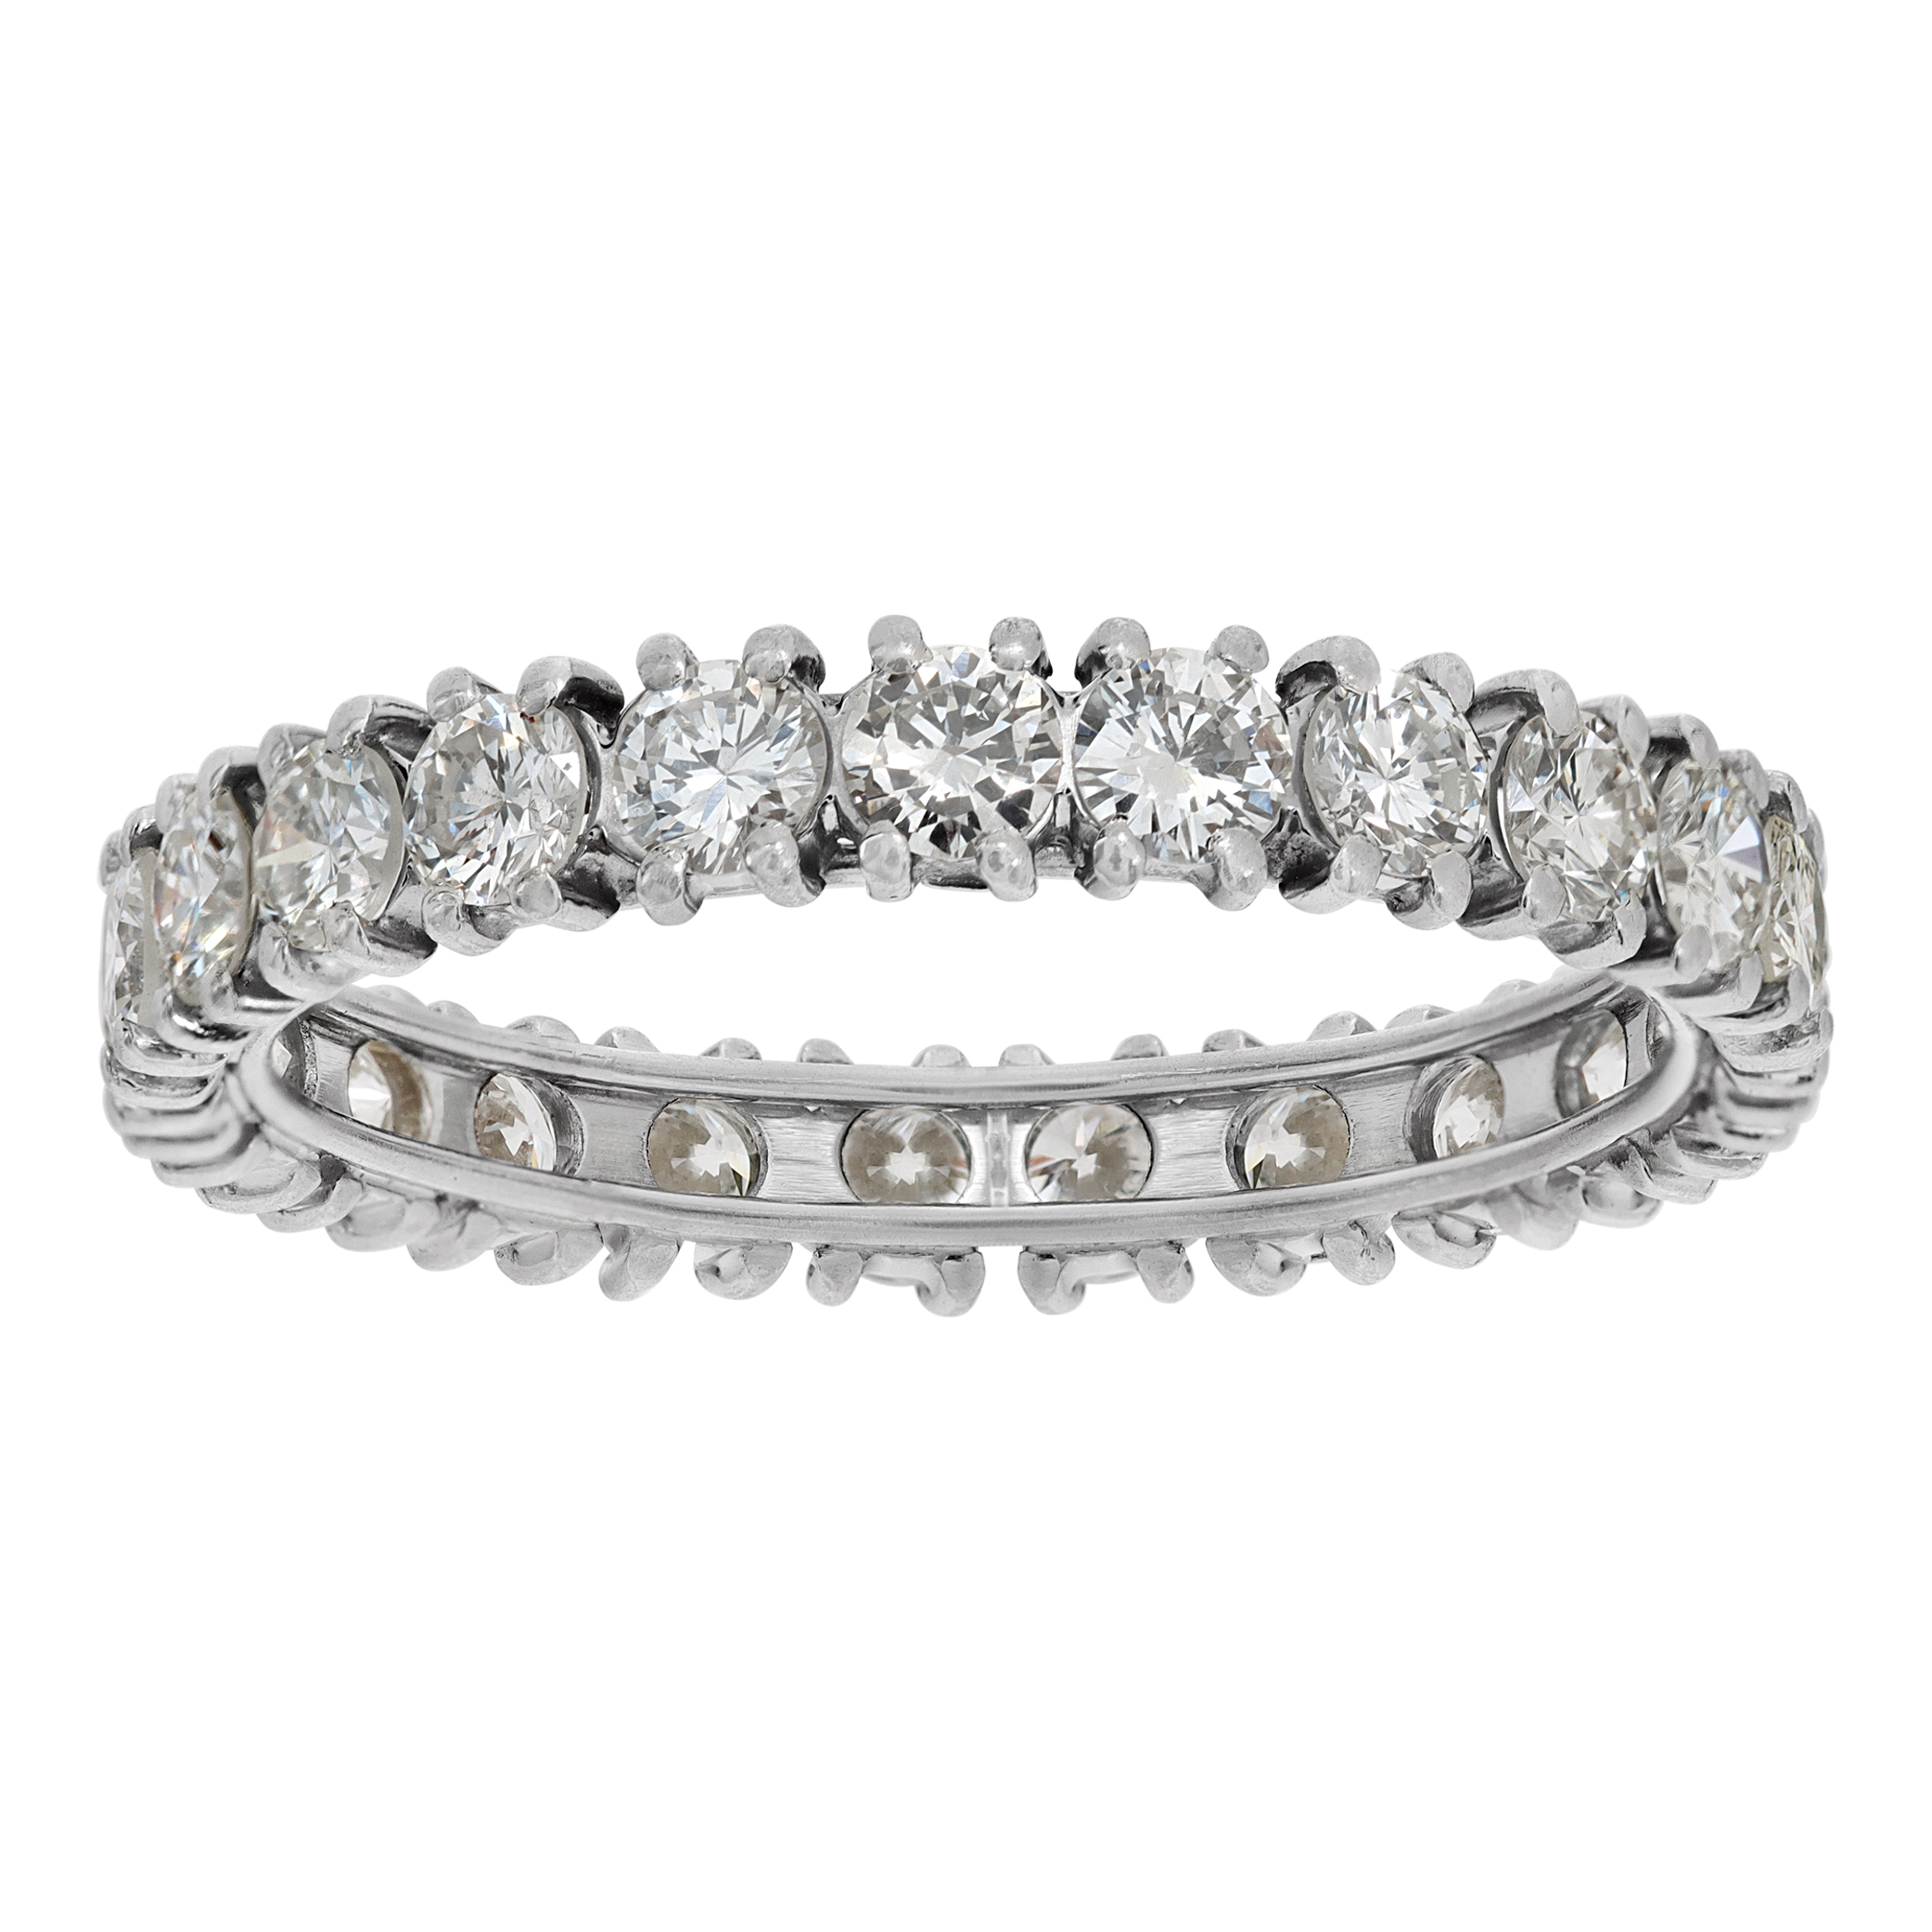 Platinum eternity band with approximately 2 carats in round cut diamonds (Stones)